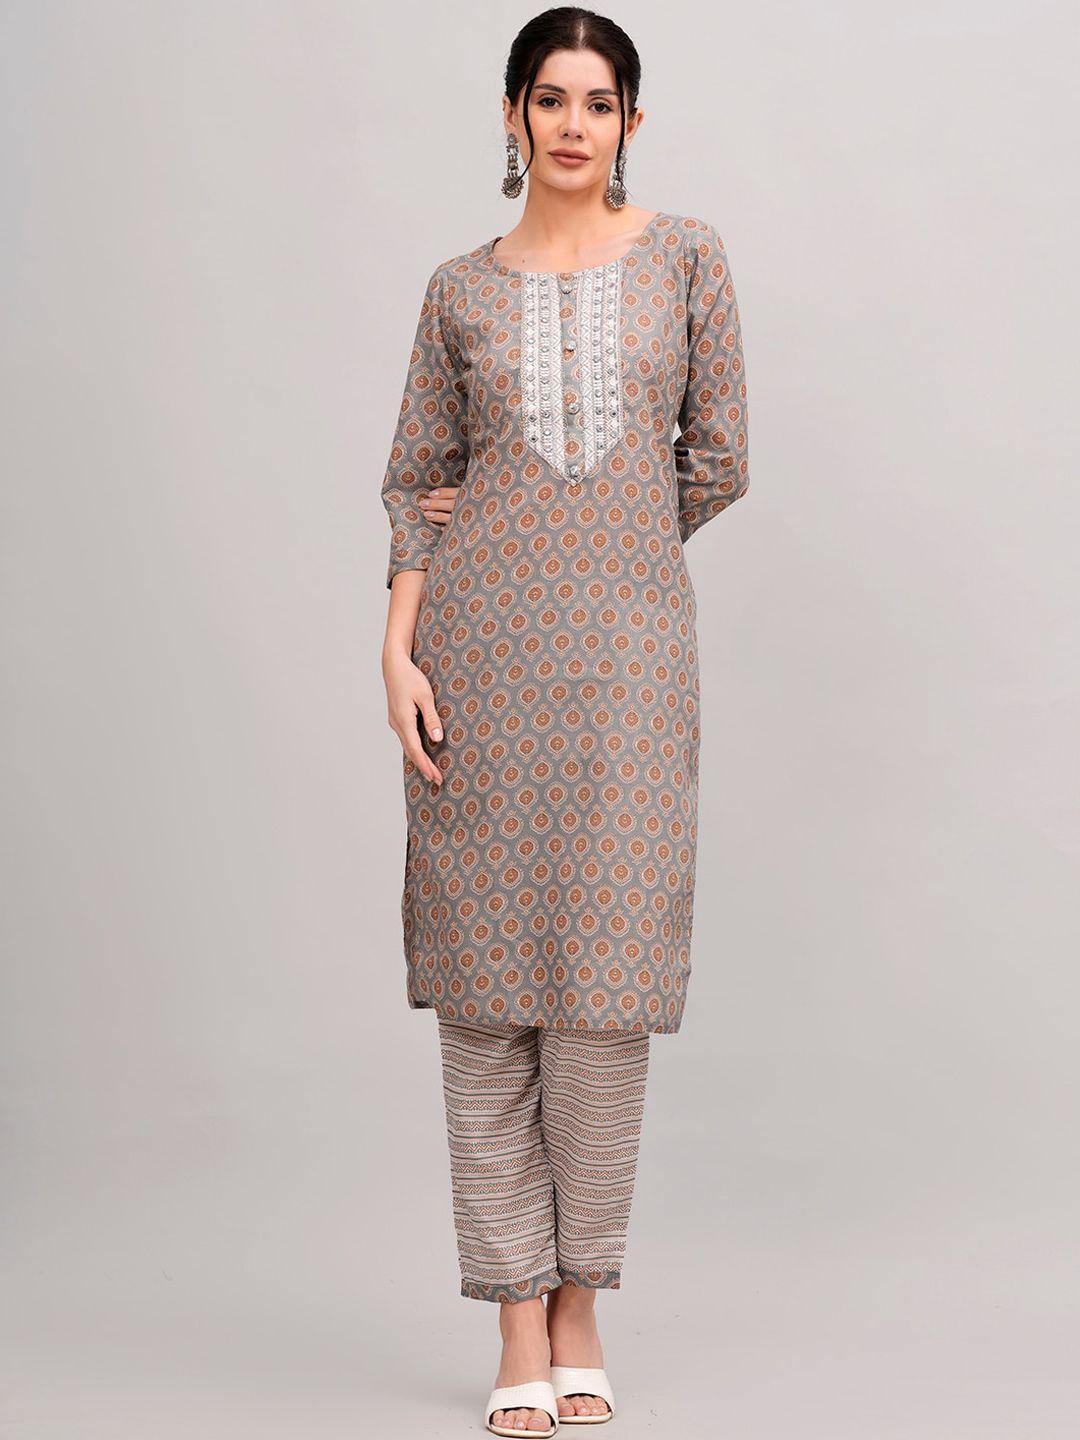 kalini floral printed straight pure cotton kurta with trousers & dupatta